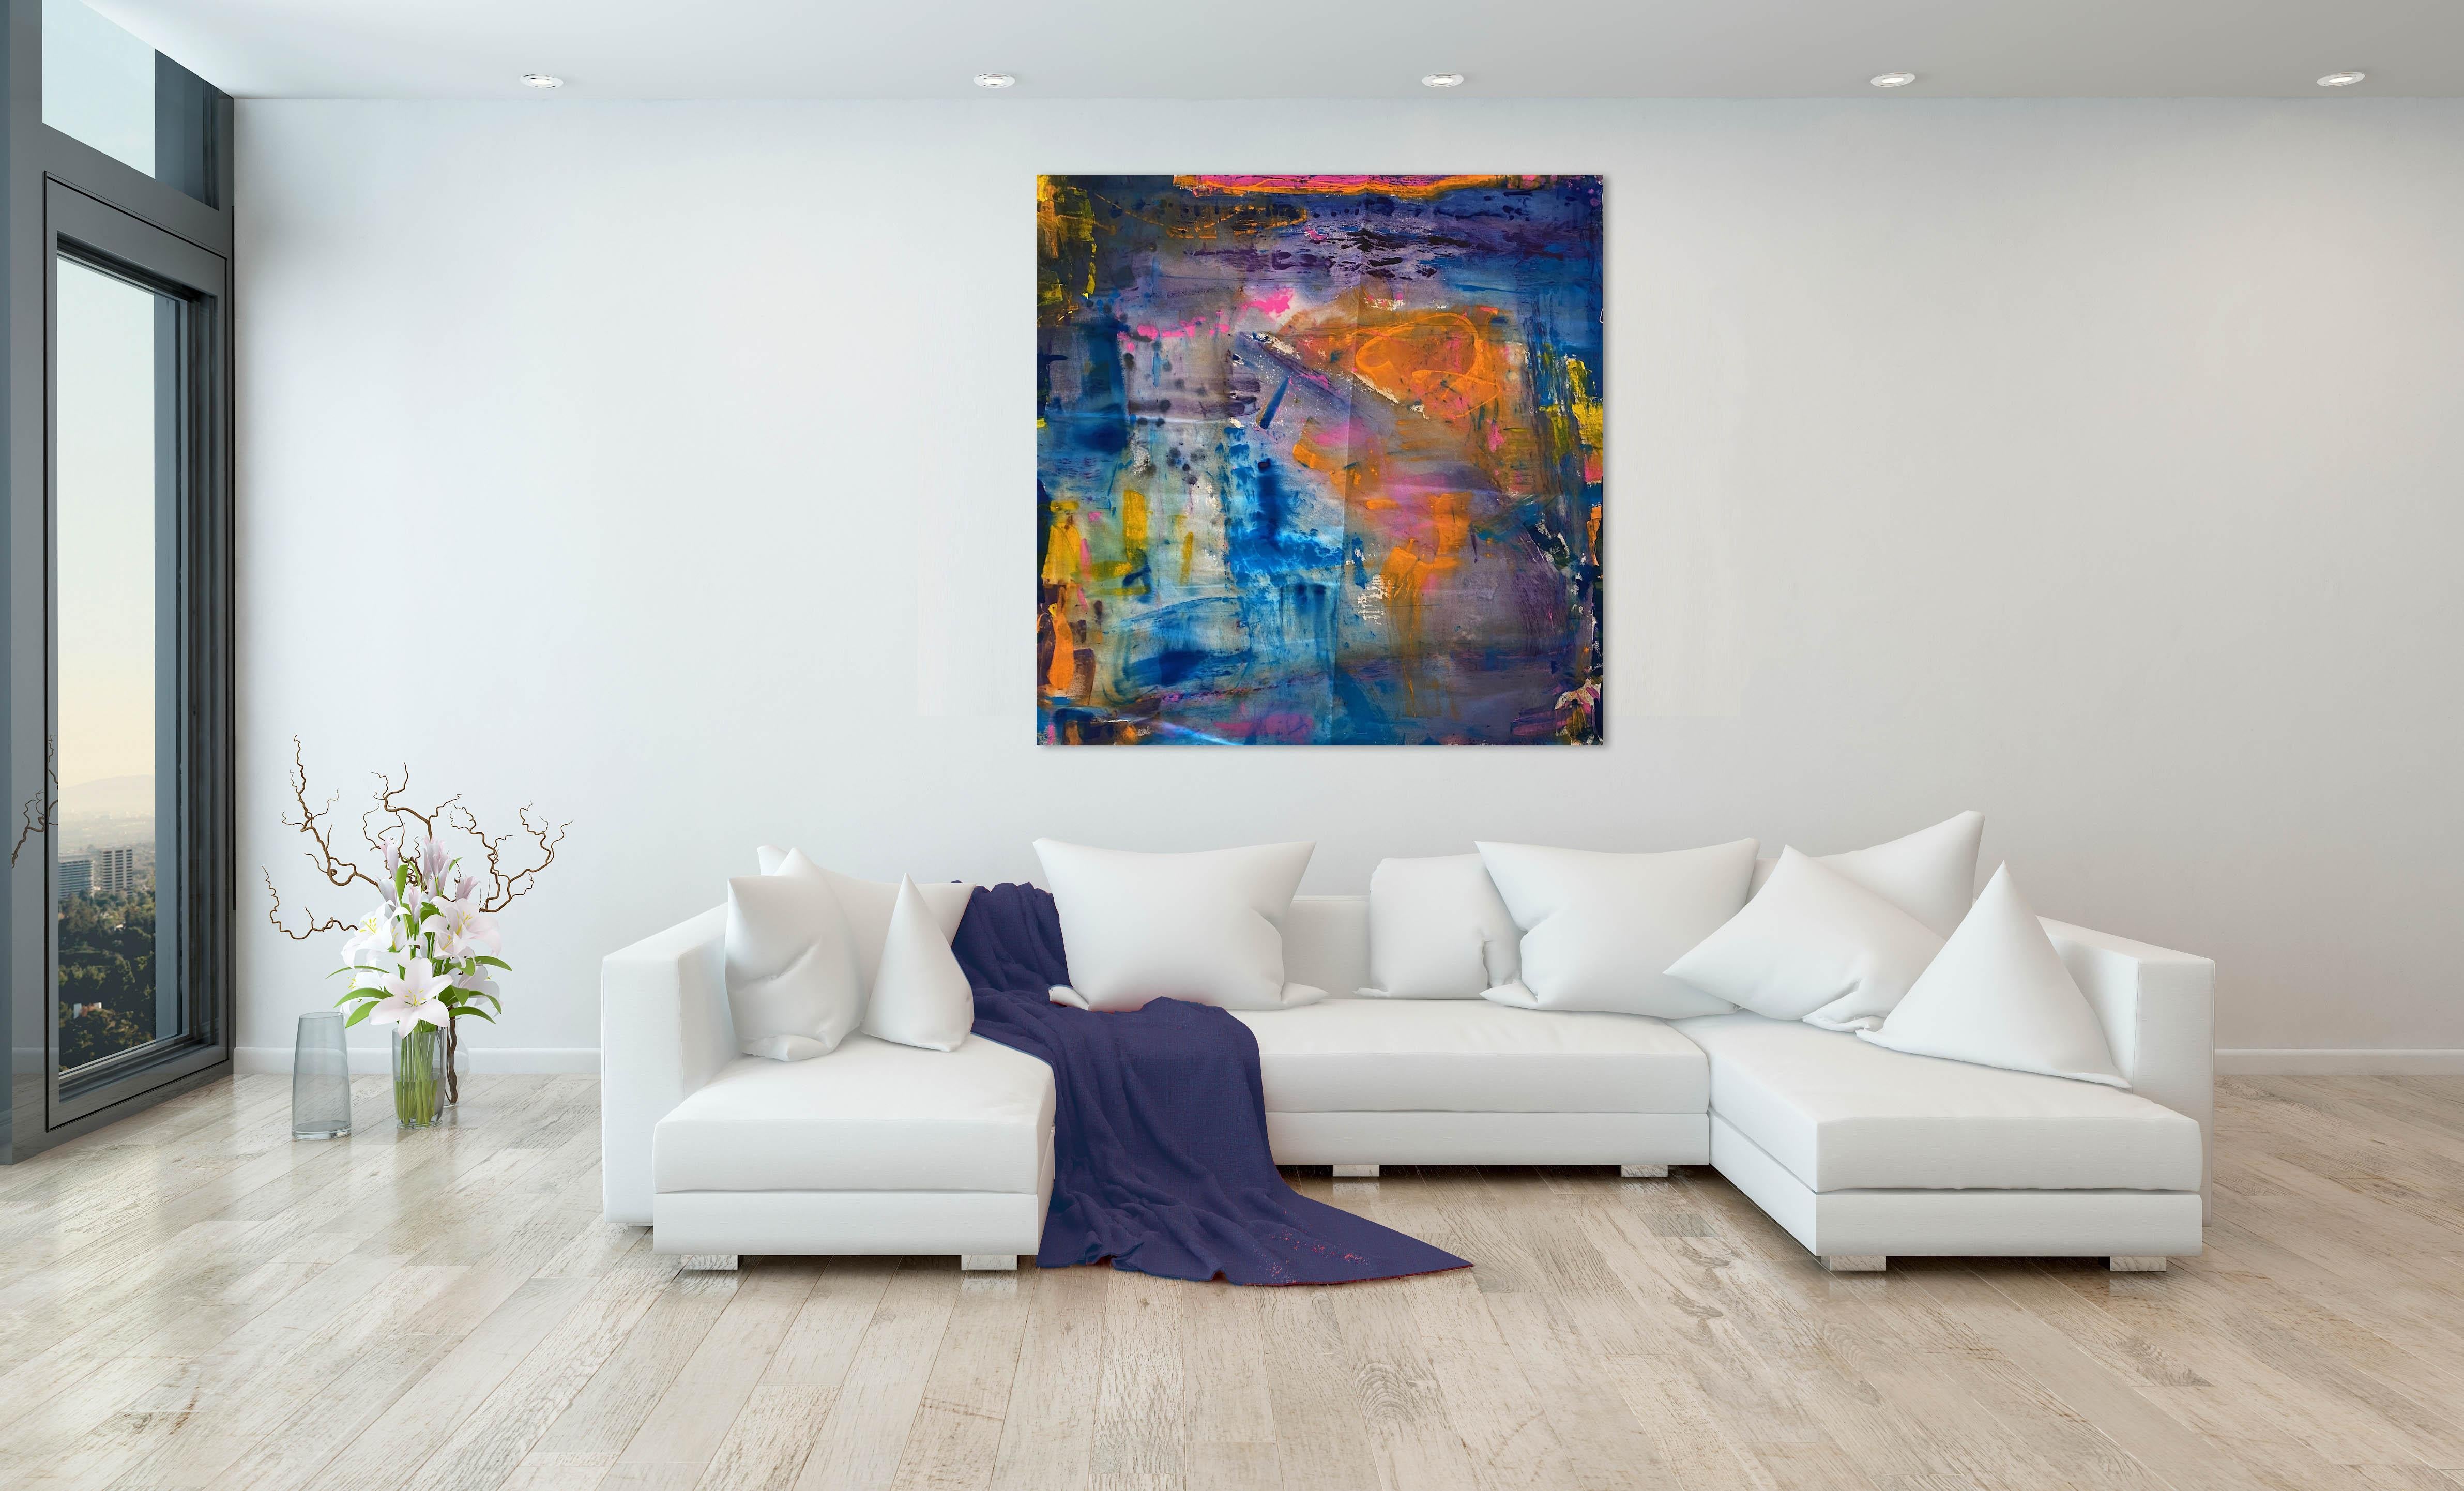 'Spring' Large Contemporary Mixed Media Abstract Blue & Orange 58”x59” By Nan - Painting by Nan Van Ryzin